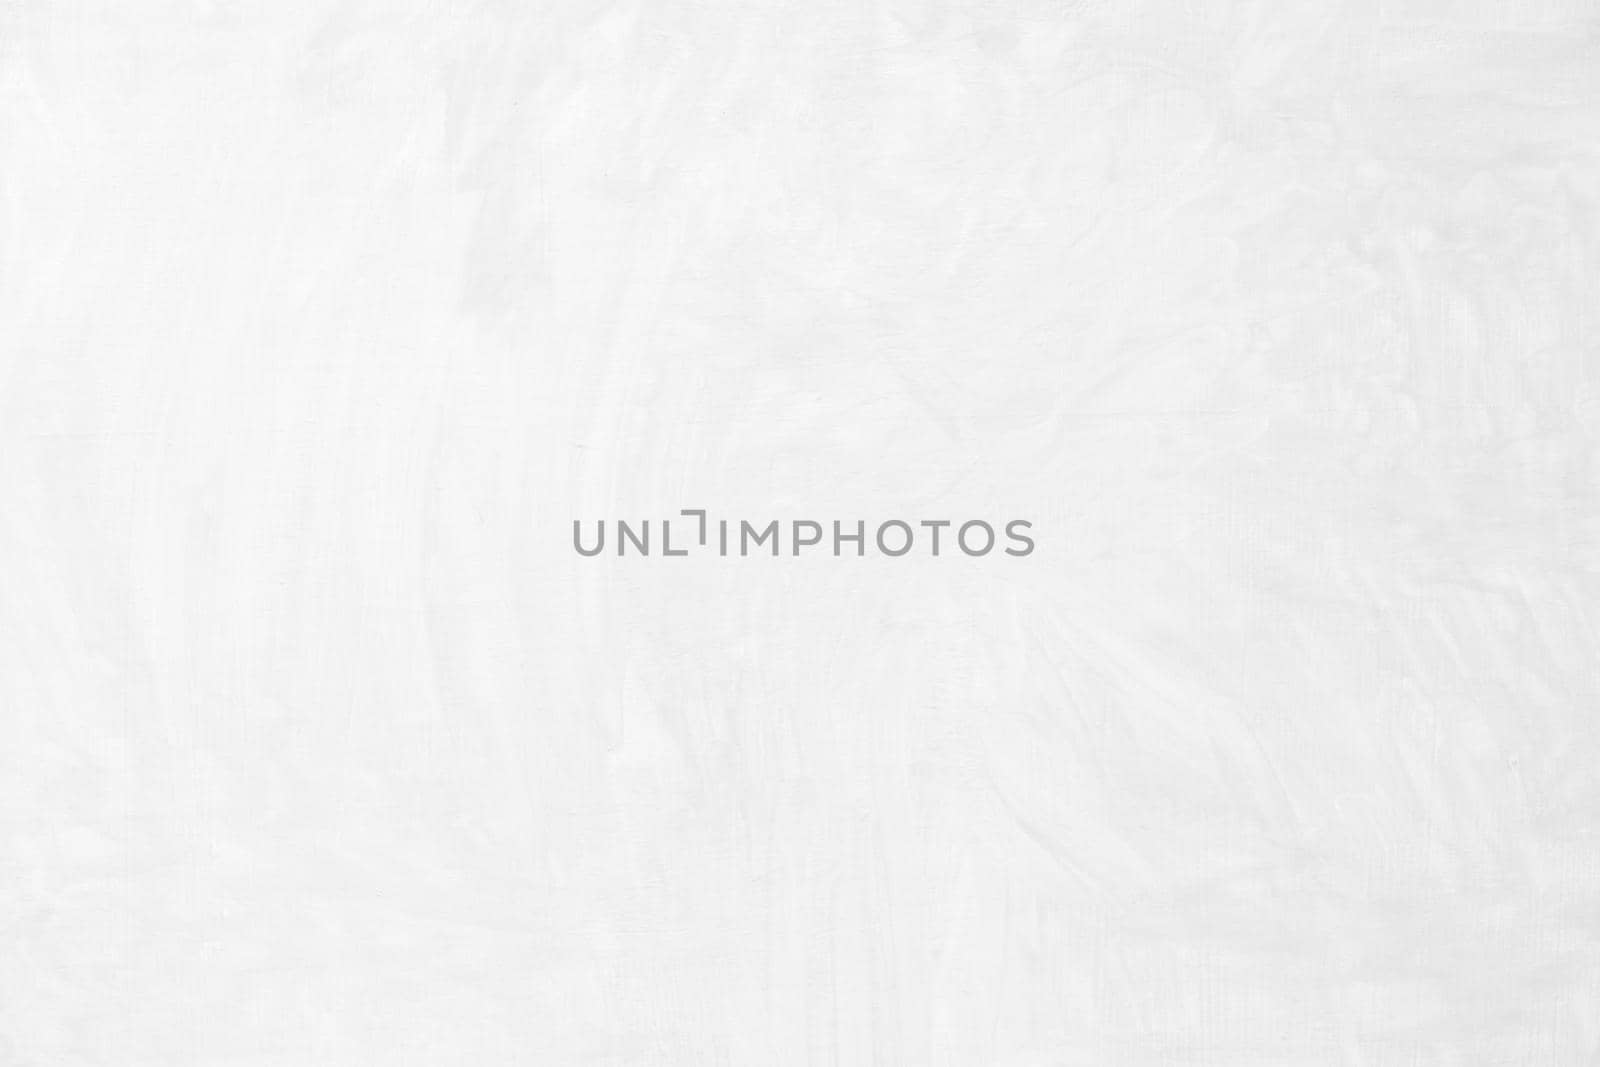 Horizontal background with copy space and surface texture closeup - white